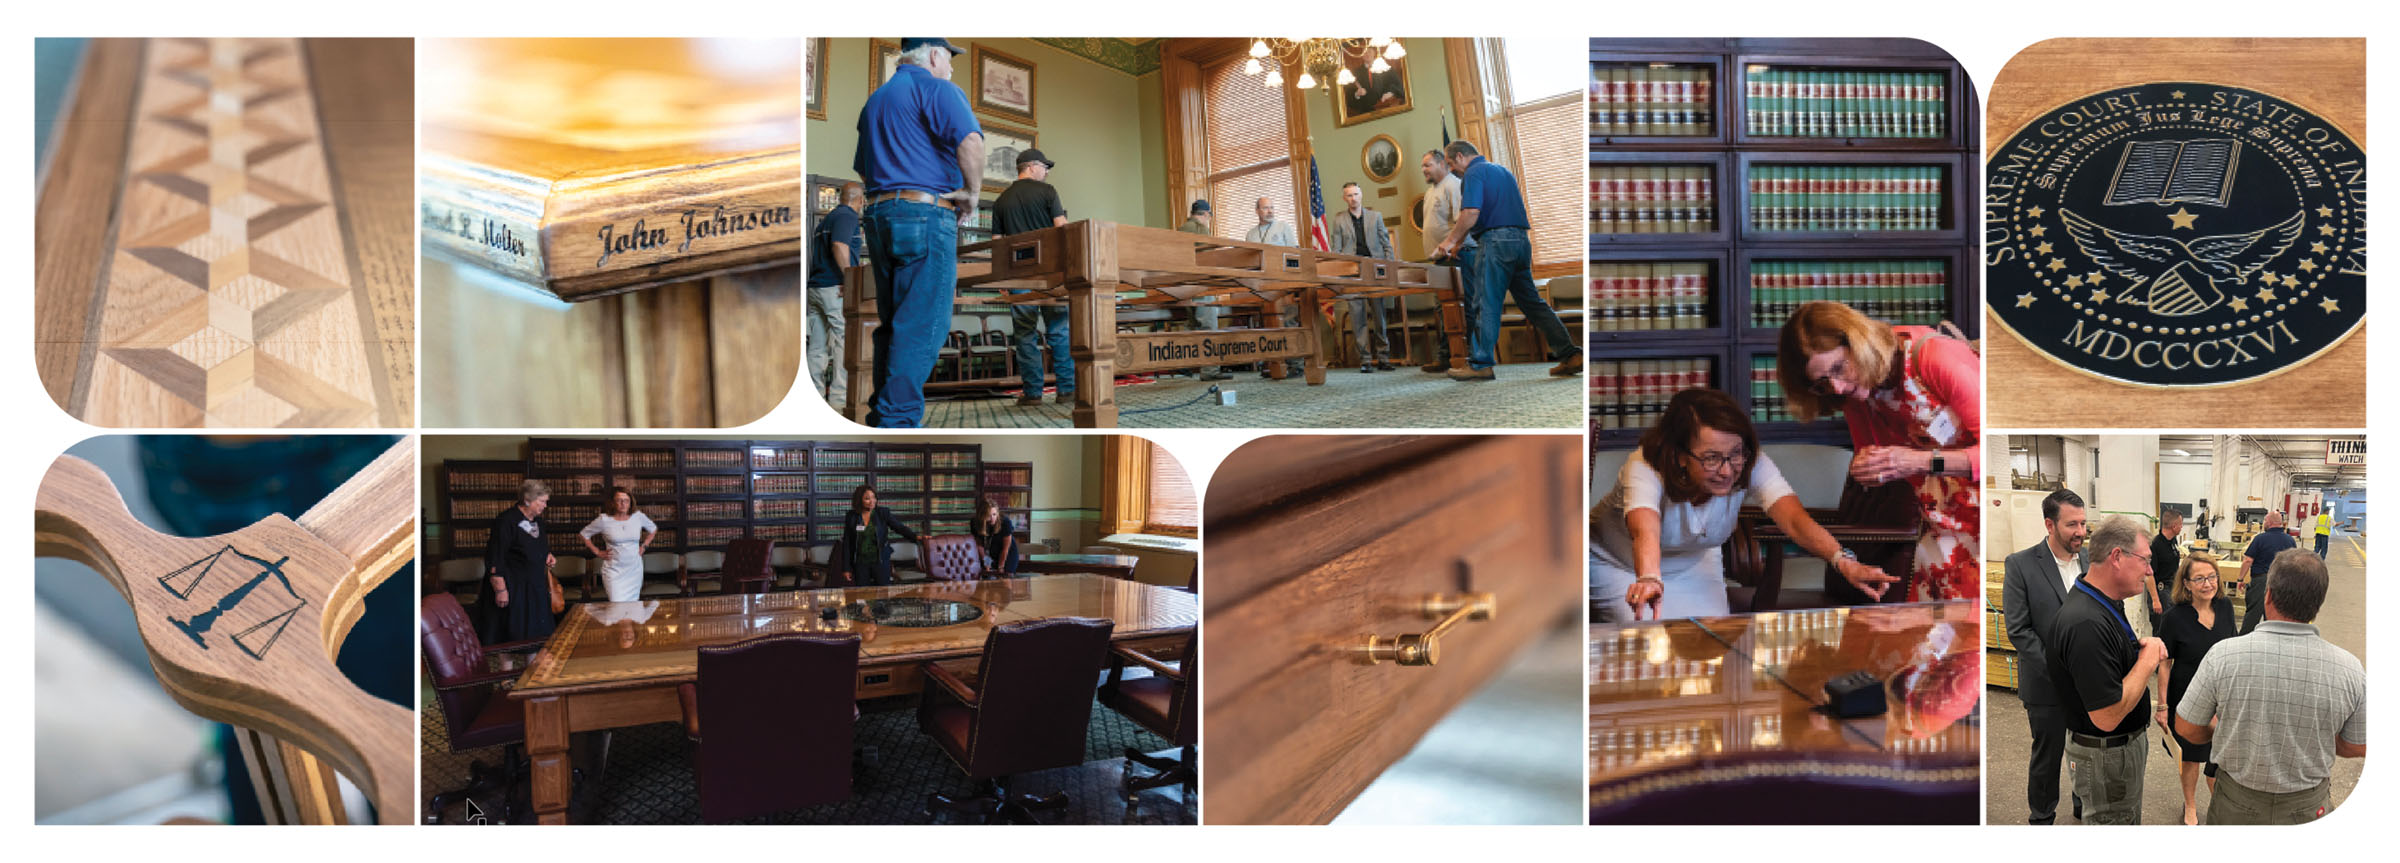 Collage of photos showing the details of the conference table, the crew setting it up, and the Chief Justice showing it to guests visiting the Court conference room.